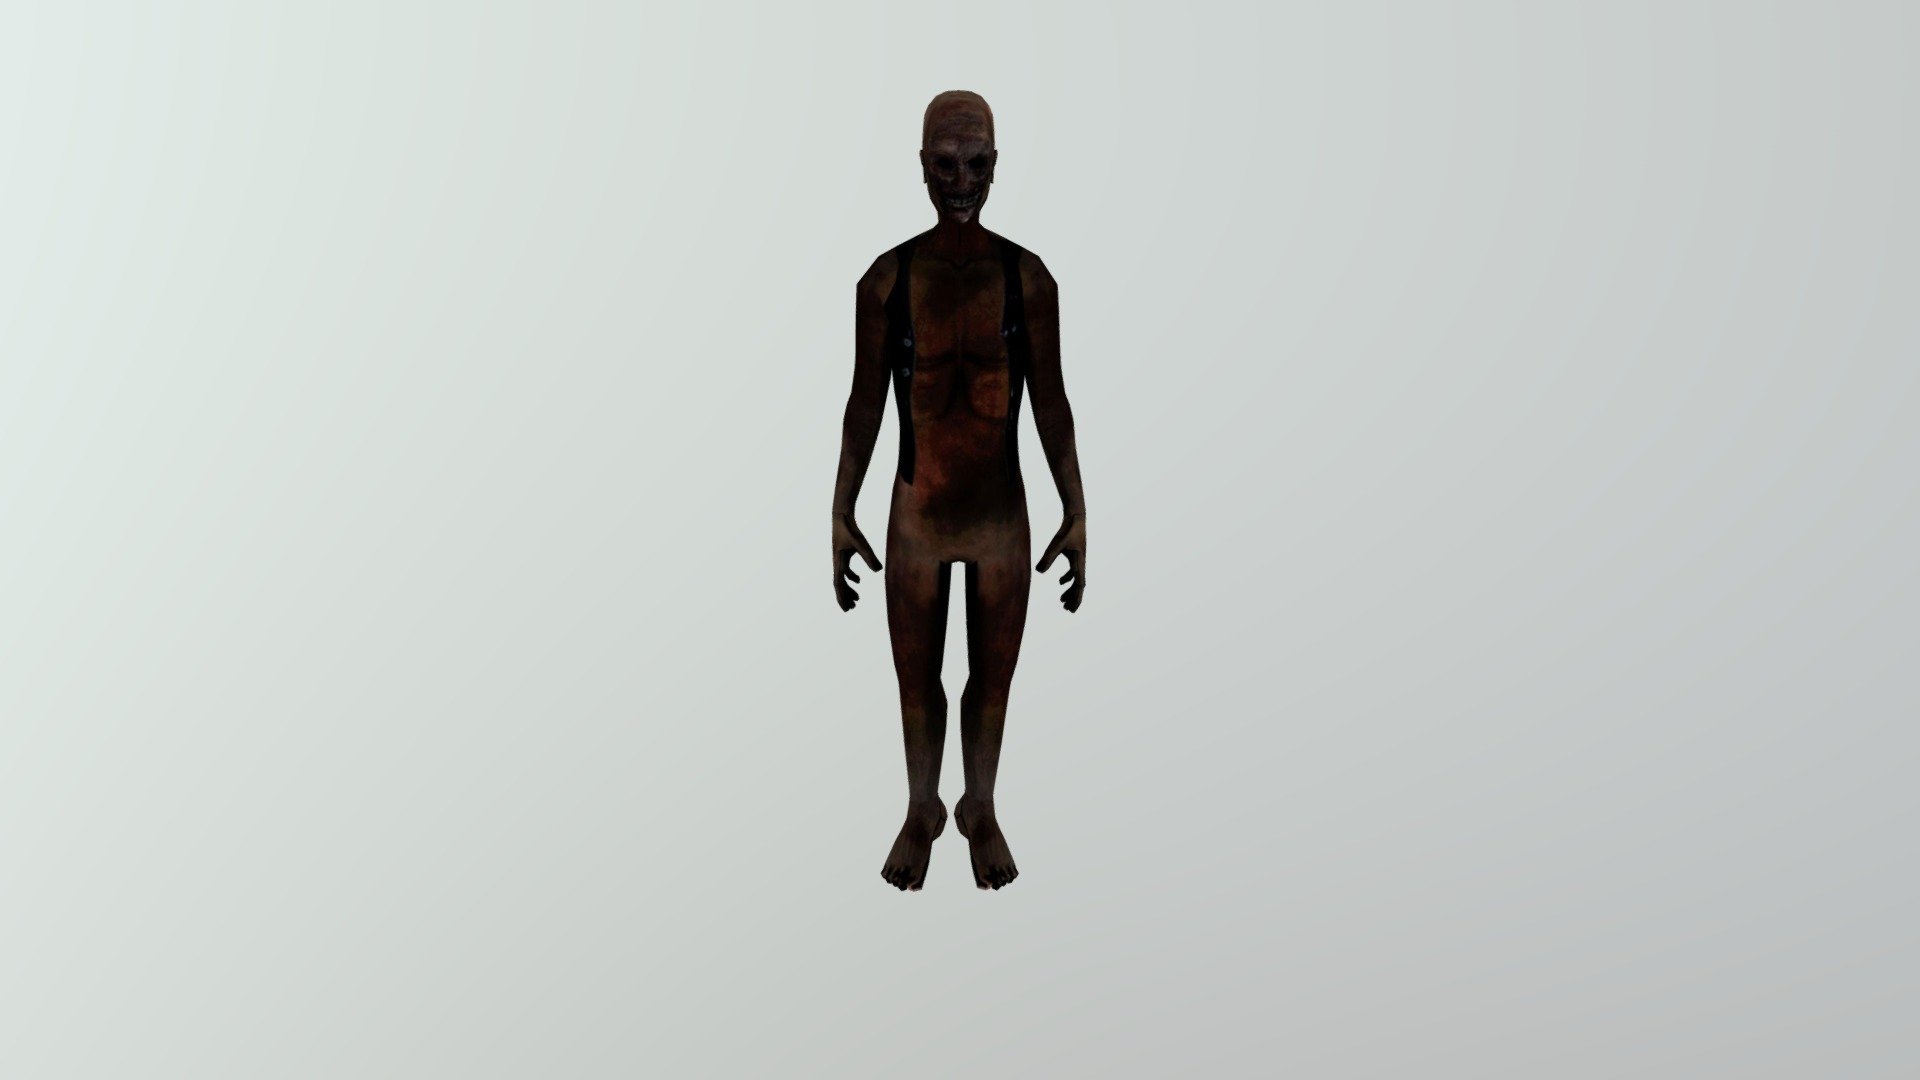 The SCP Unity model for 106 looks amazing : r/scpcontainmentbreach